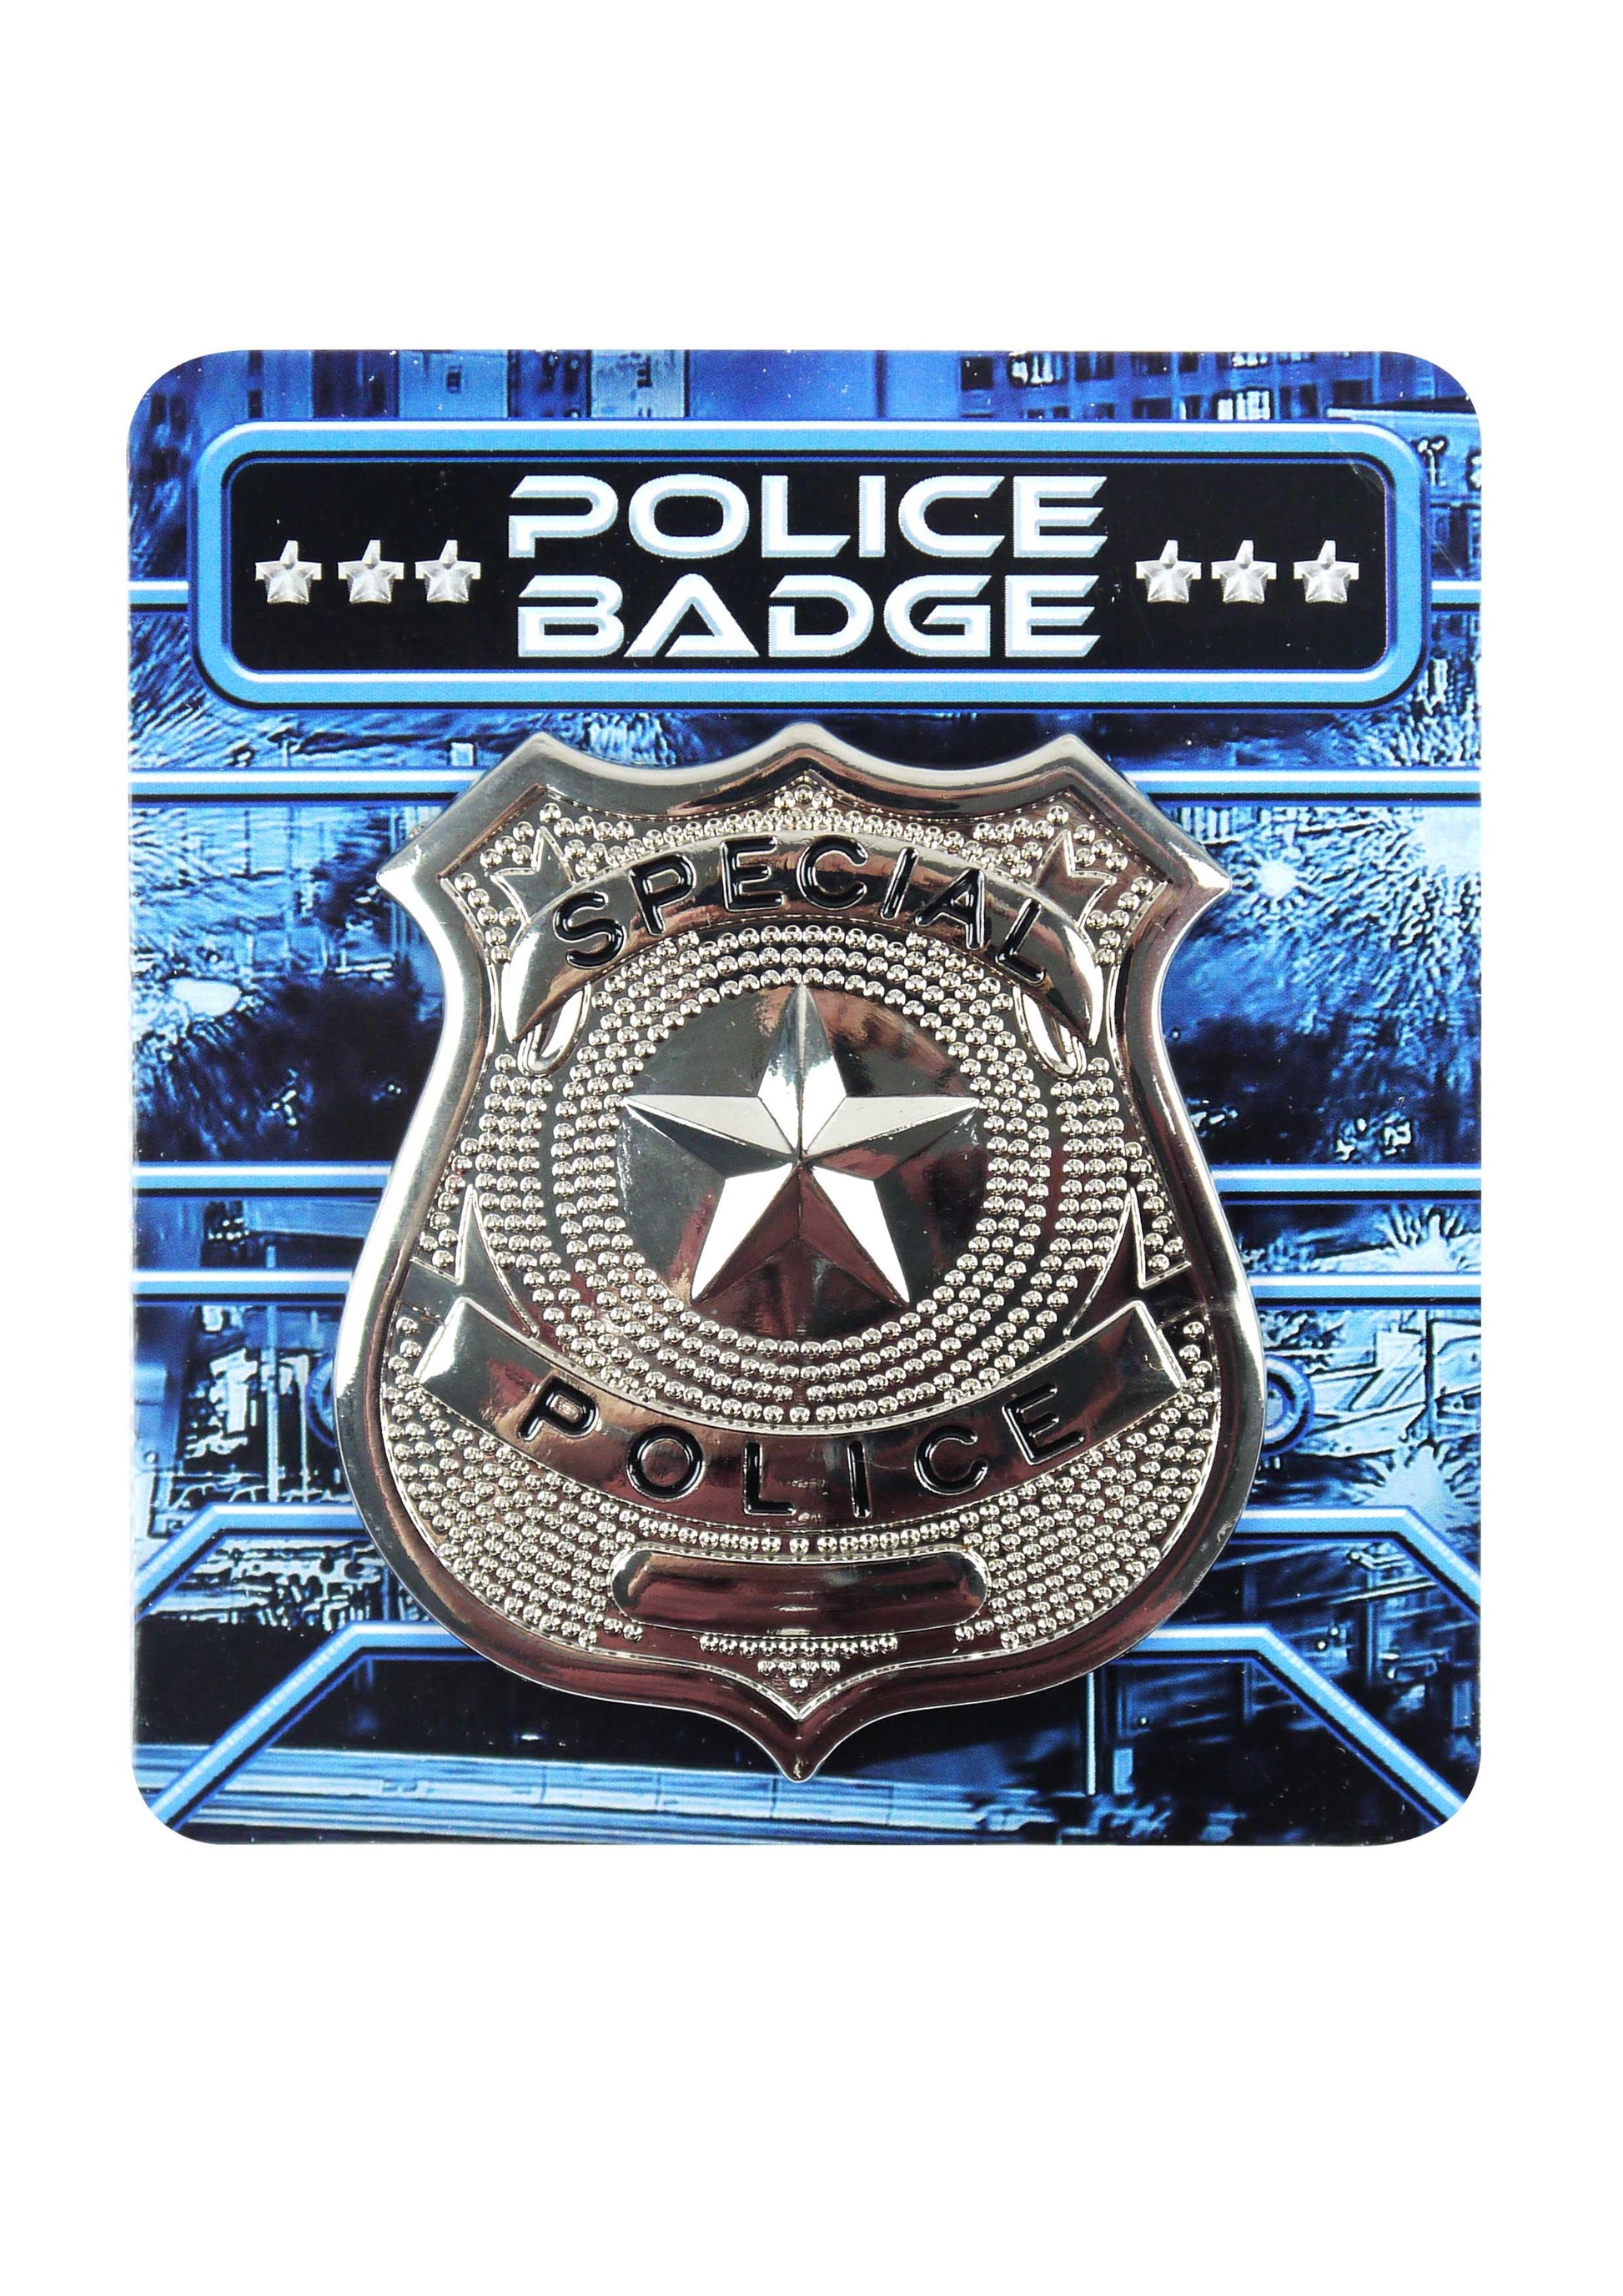 Silver Metal Police Badge Unisex Adults Police costume Fancy Dress Accessory - Labreeze